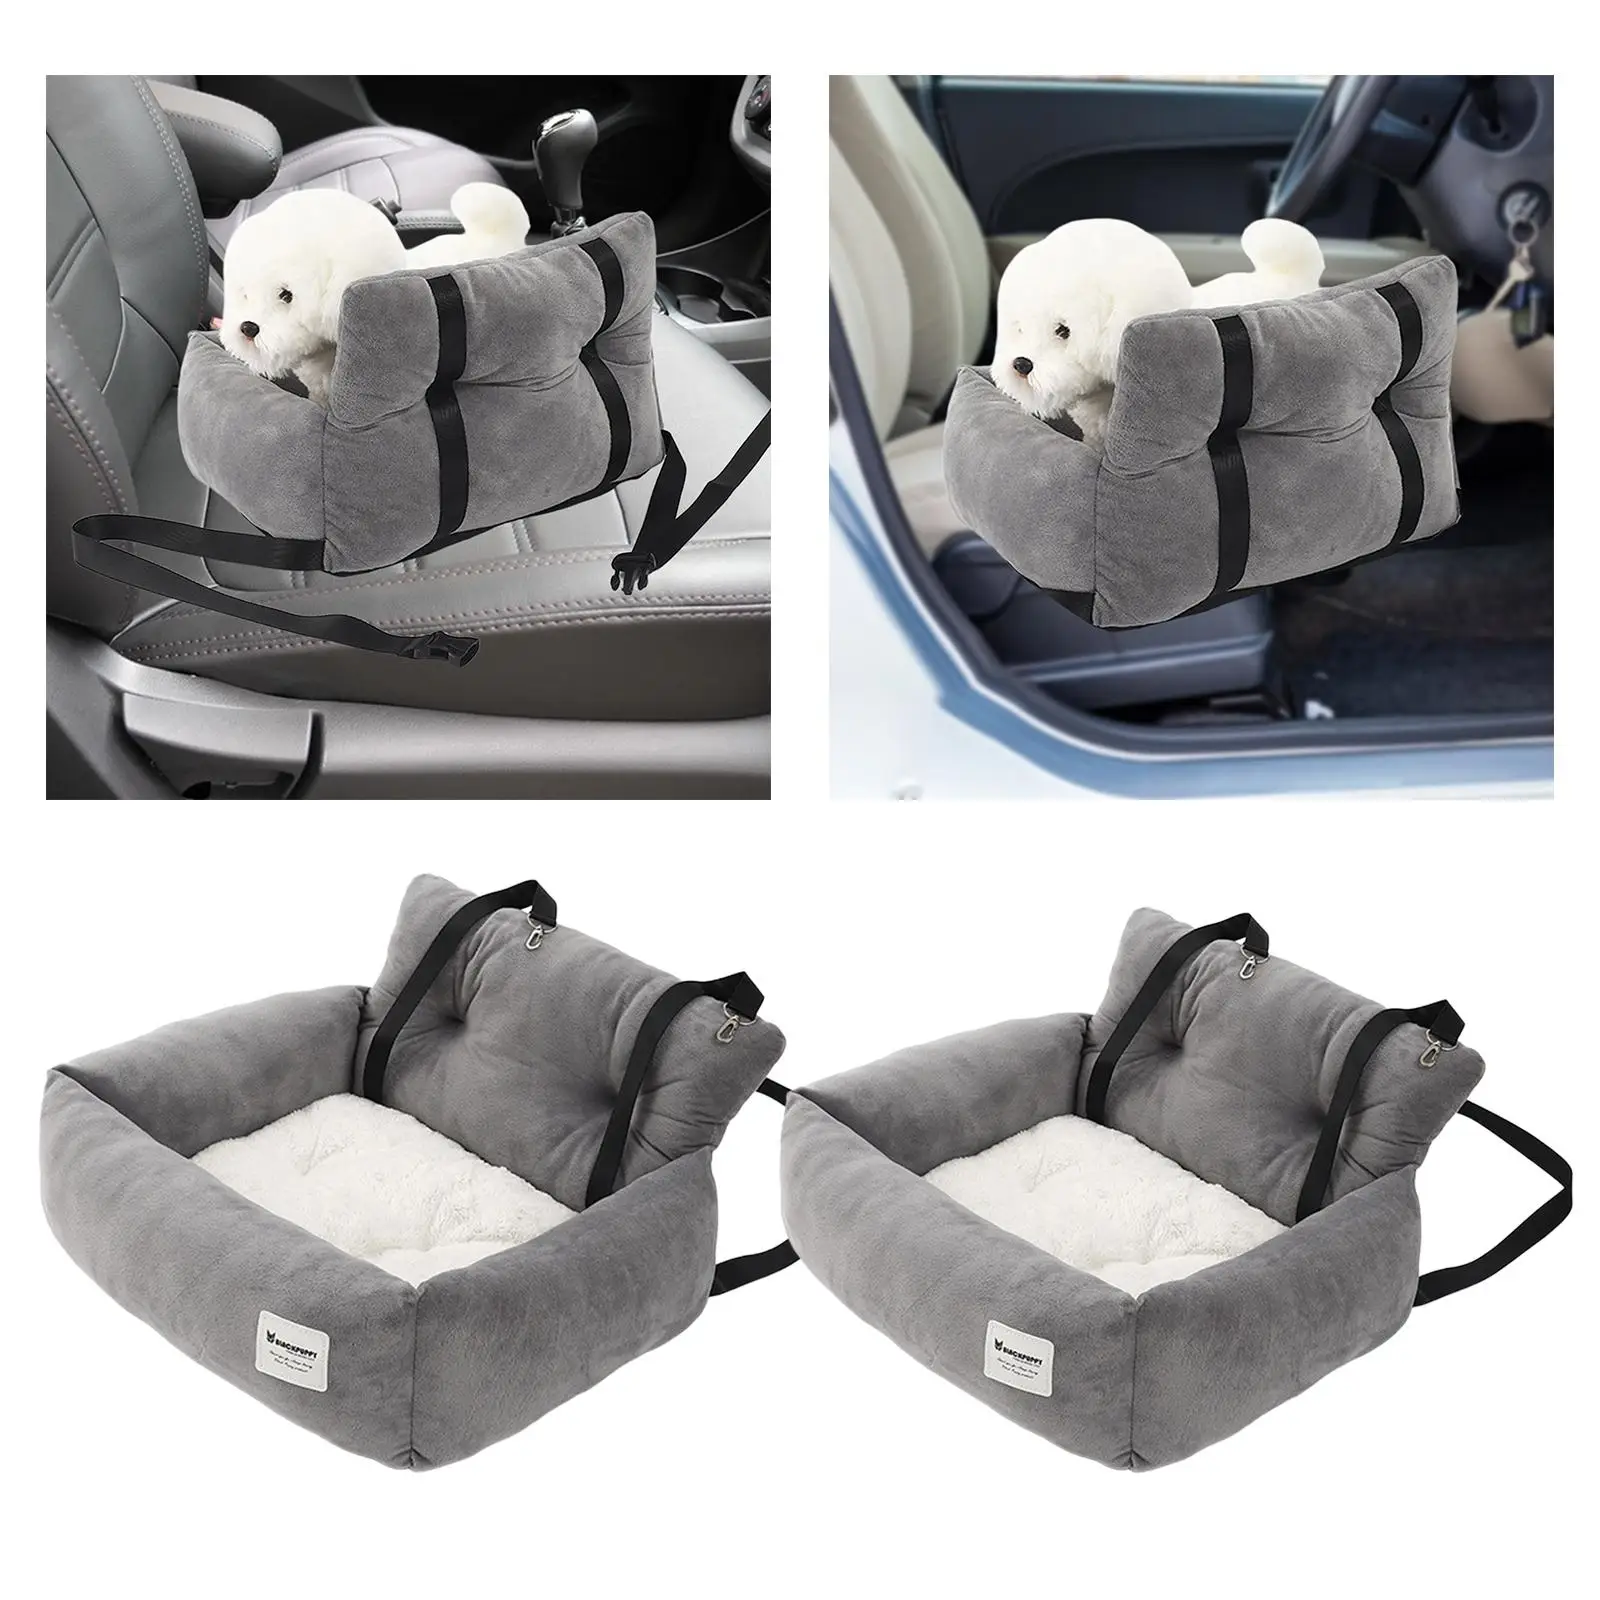 Dog Car SUV Seat Puppy Bed with Fixed Strap Convenient Assemble Anti Slip Bottom Multipurpose Adjustable Strap for Traveling